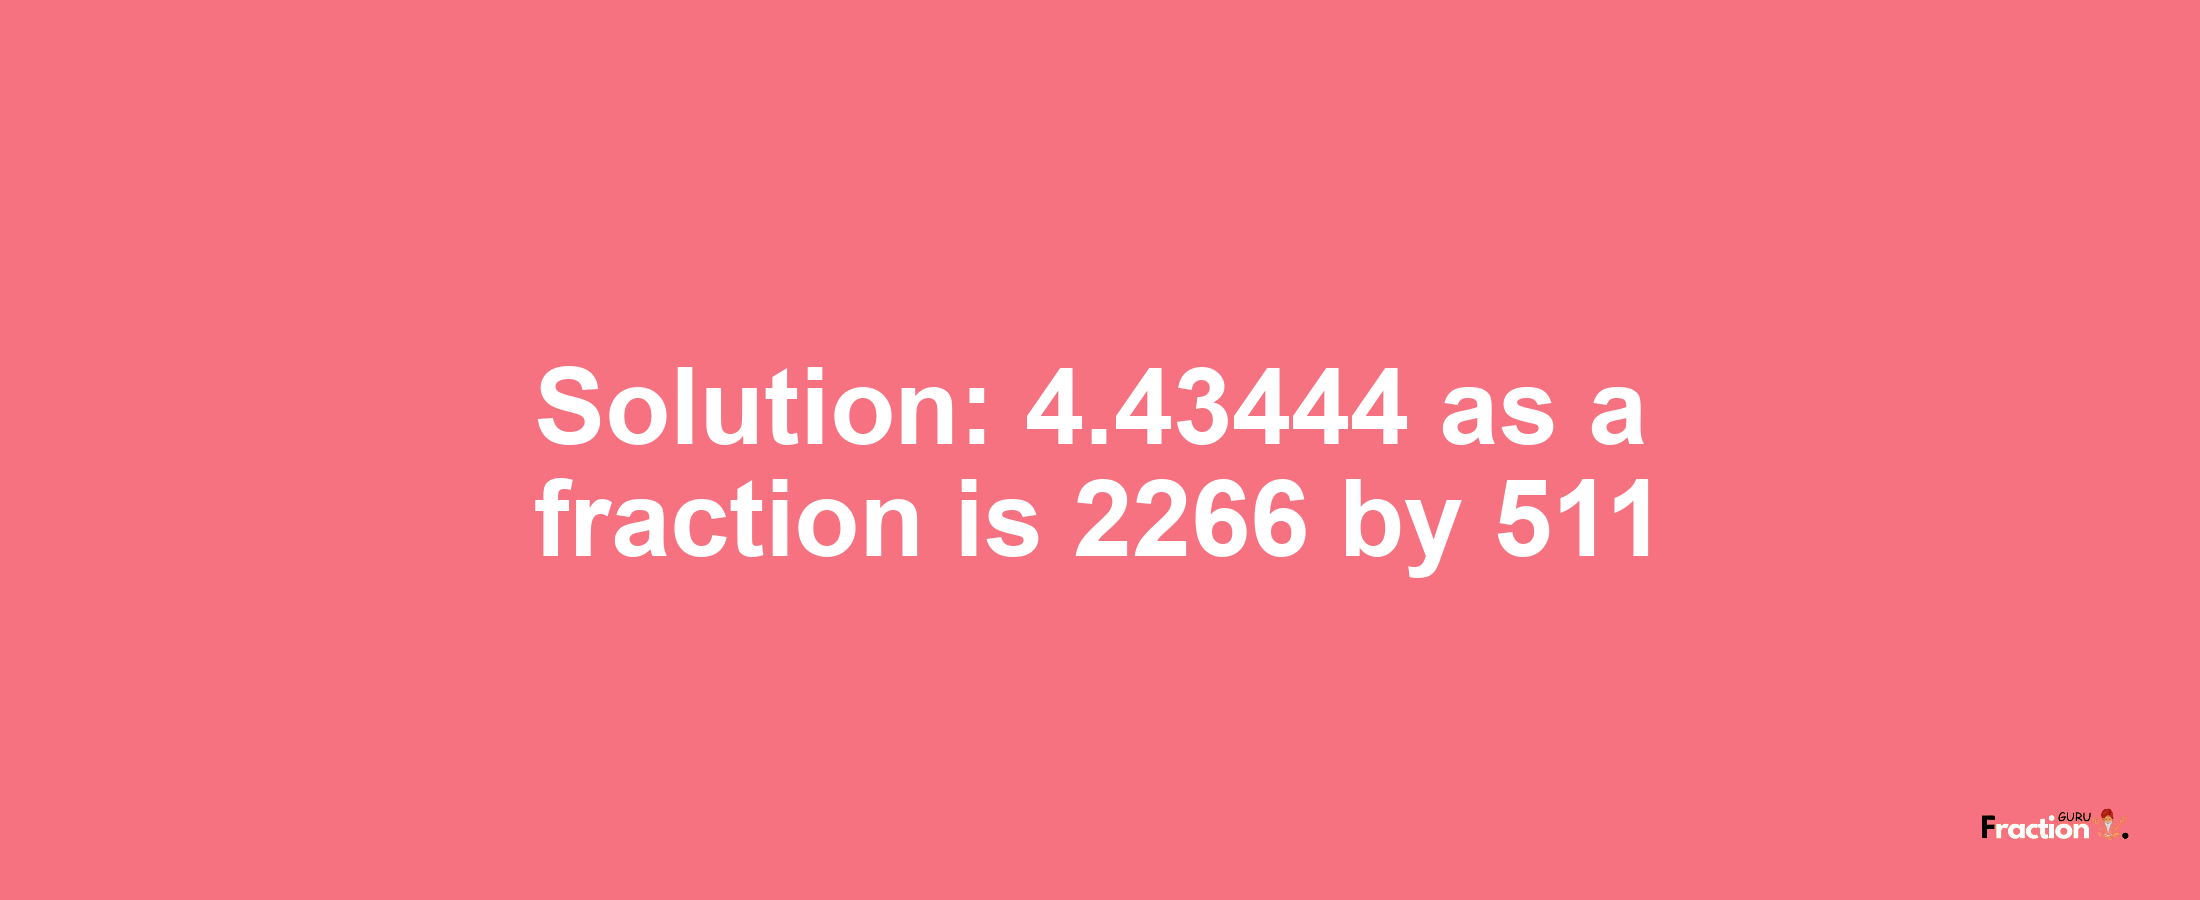 Solution:4.43444 as a fraction is 2266/511